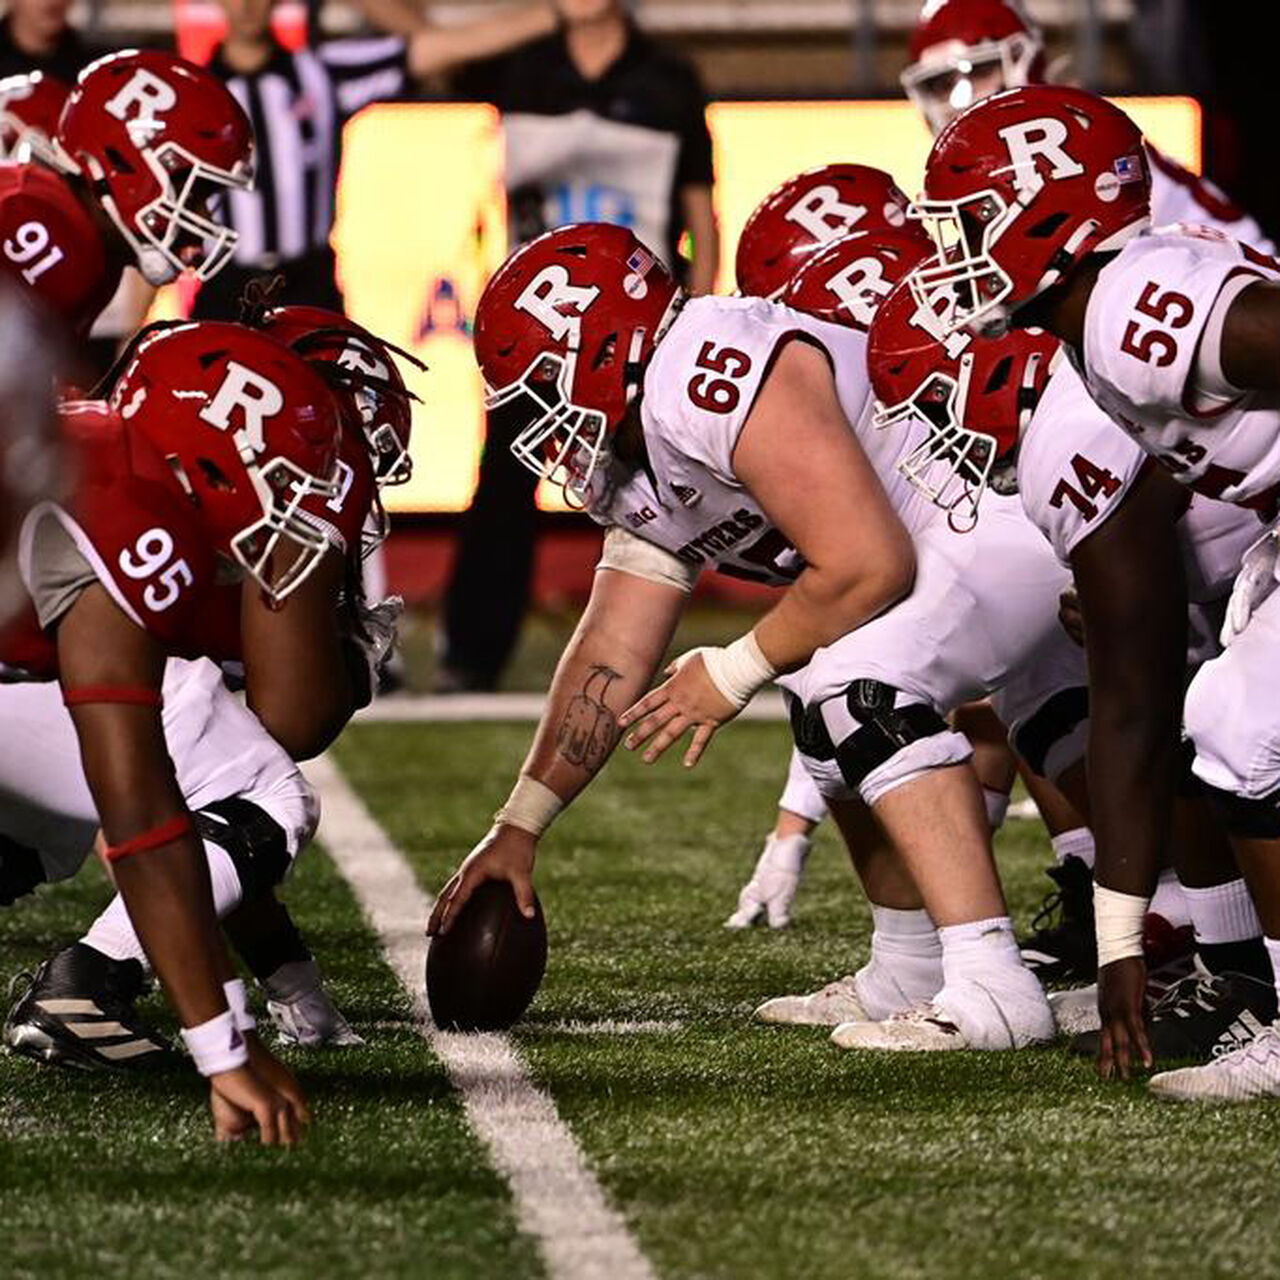 Rutgers Football players setting up the start of a play during the annual Scarlet and White game image number 0